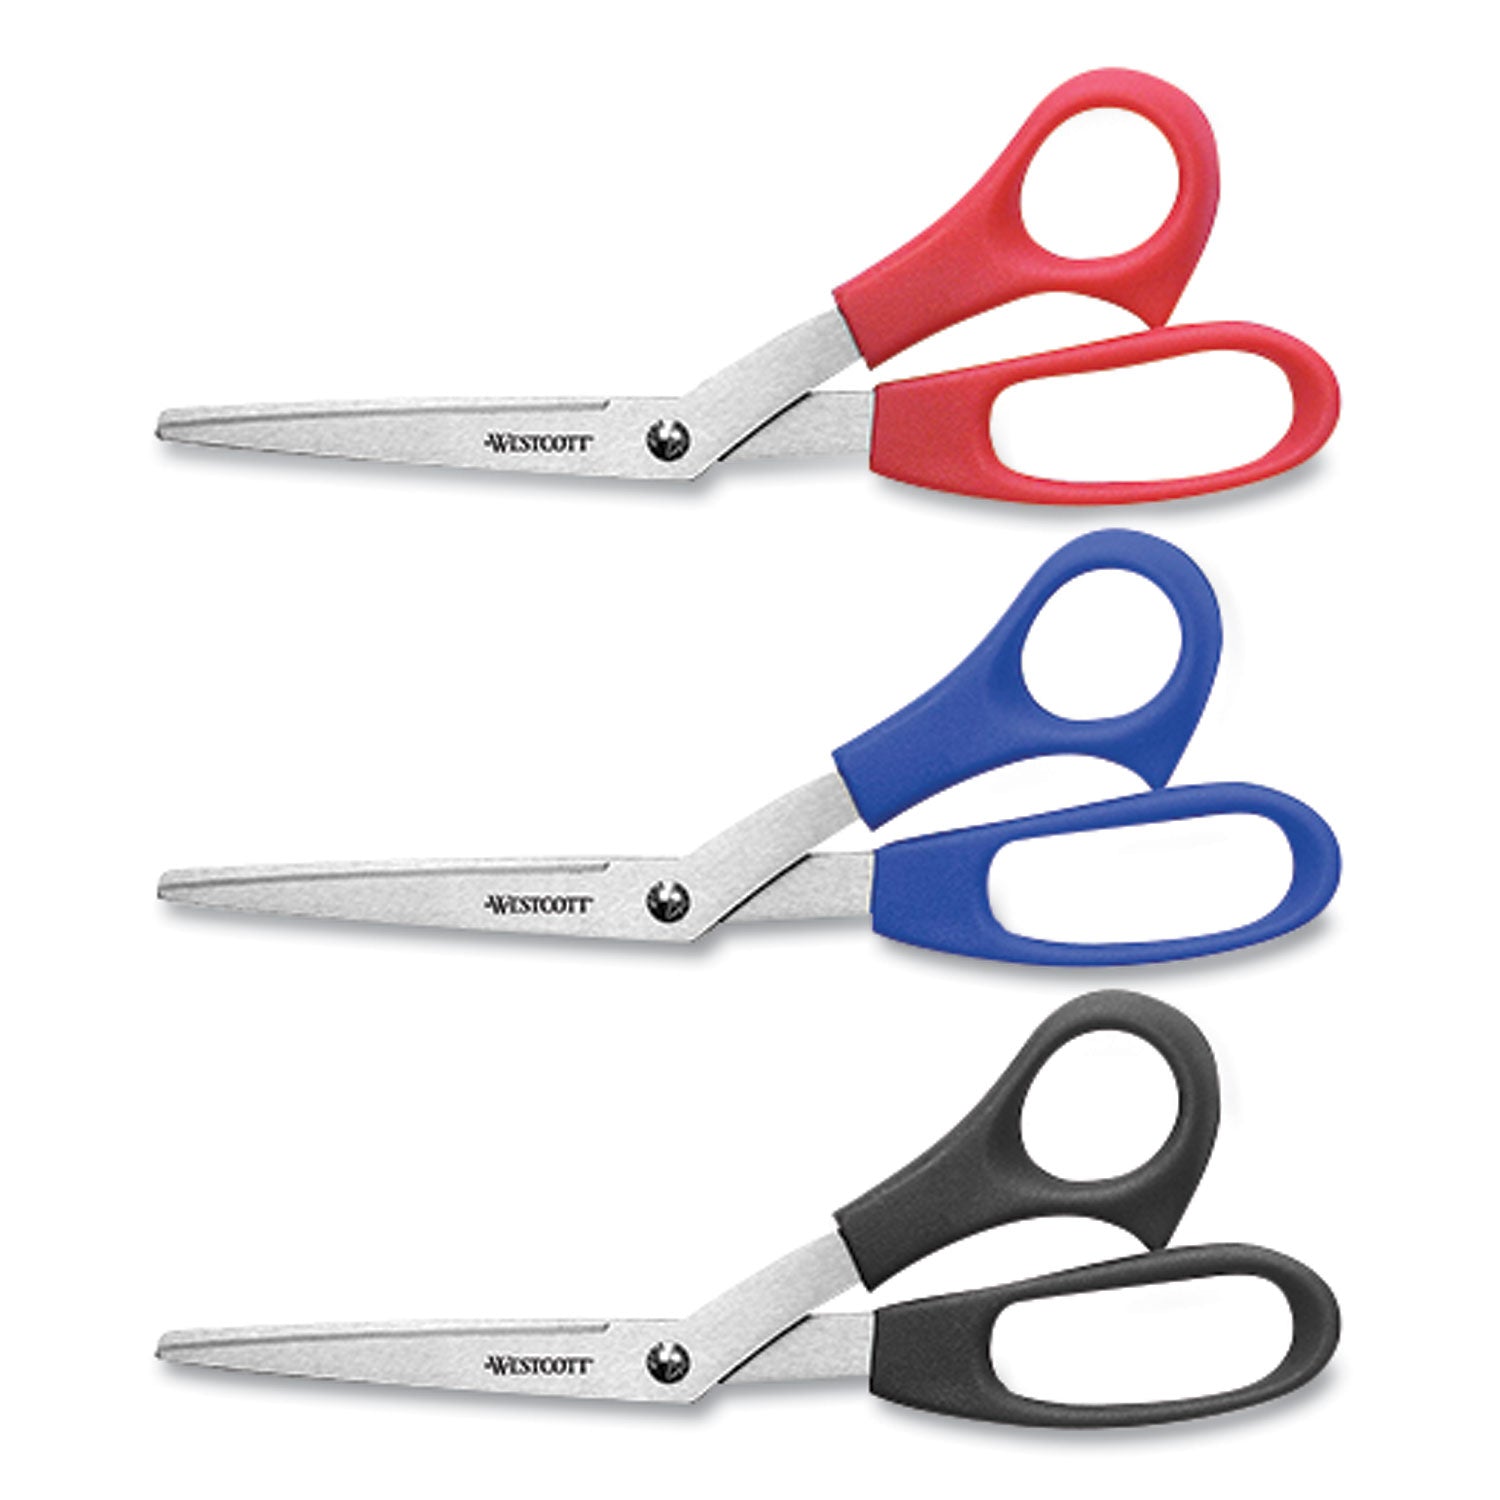 all-purpose-value-stainless-steel-scissors-three-pack-8-long-3-cut-length-assorted-color-offset-handles-3-pack_wtc13023 - 2